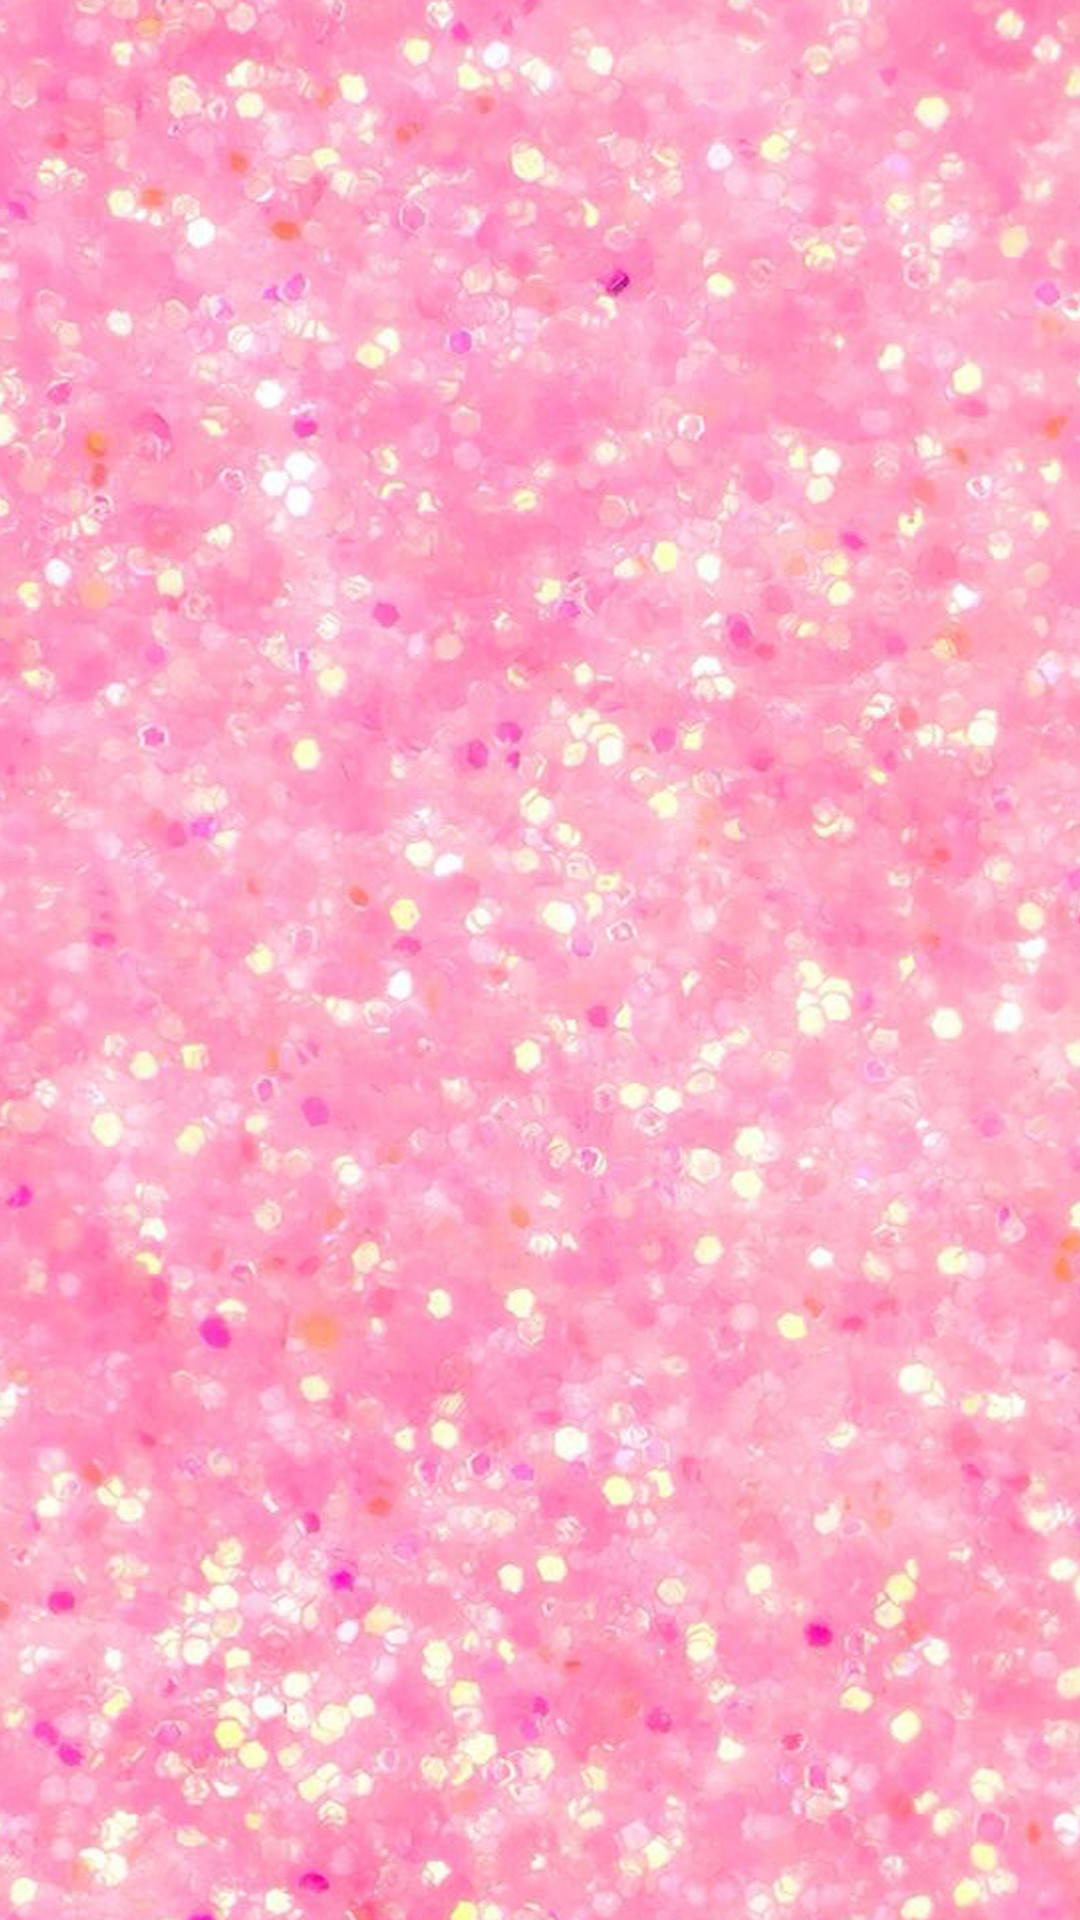 1080x1920 pink sparkle iphone background 7